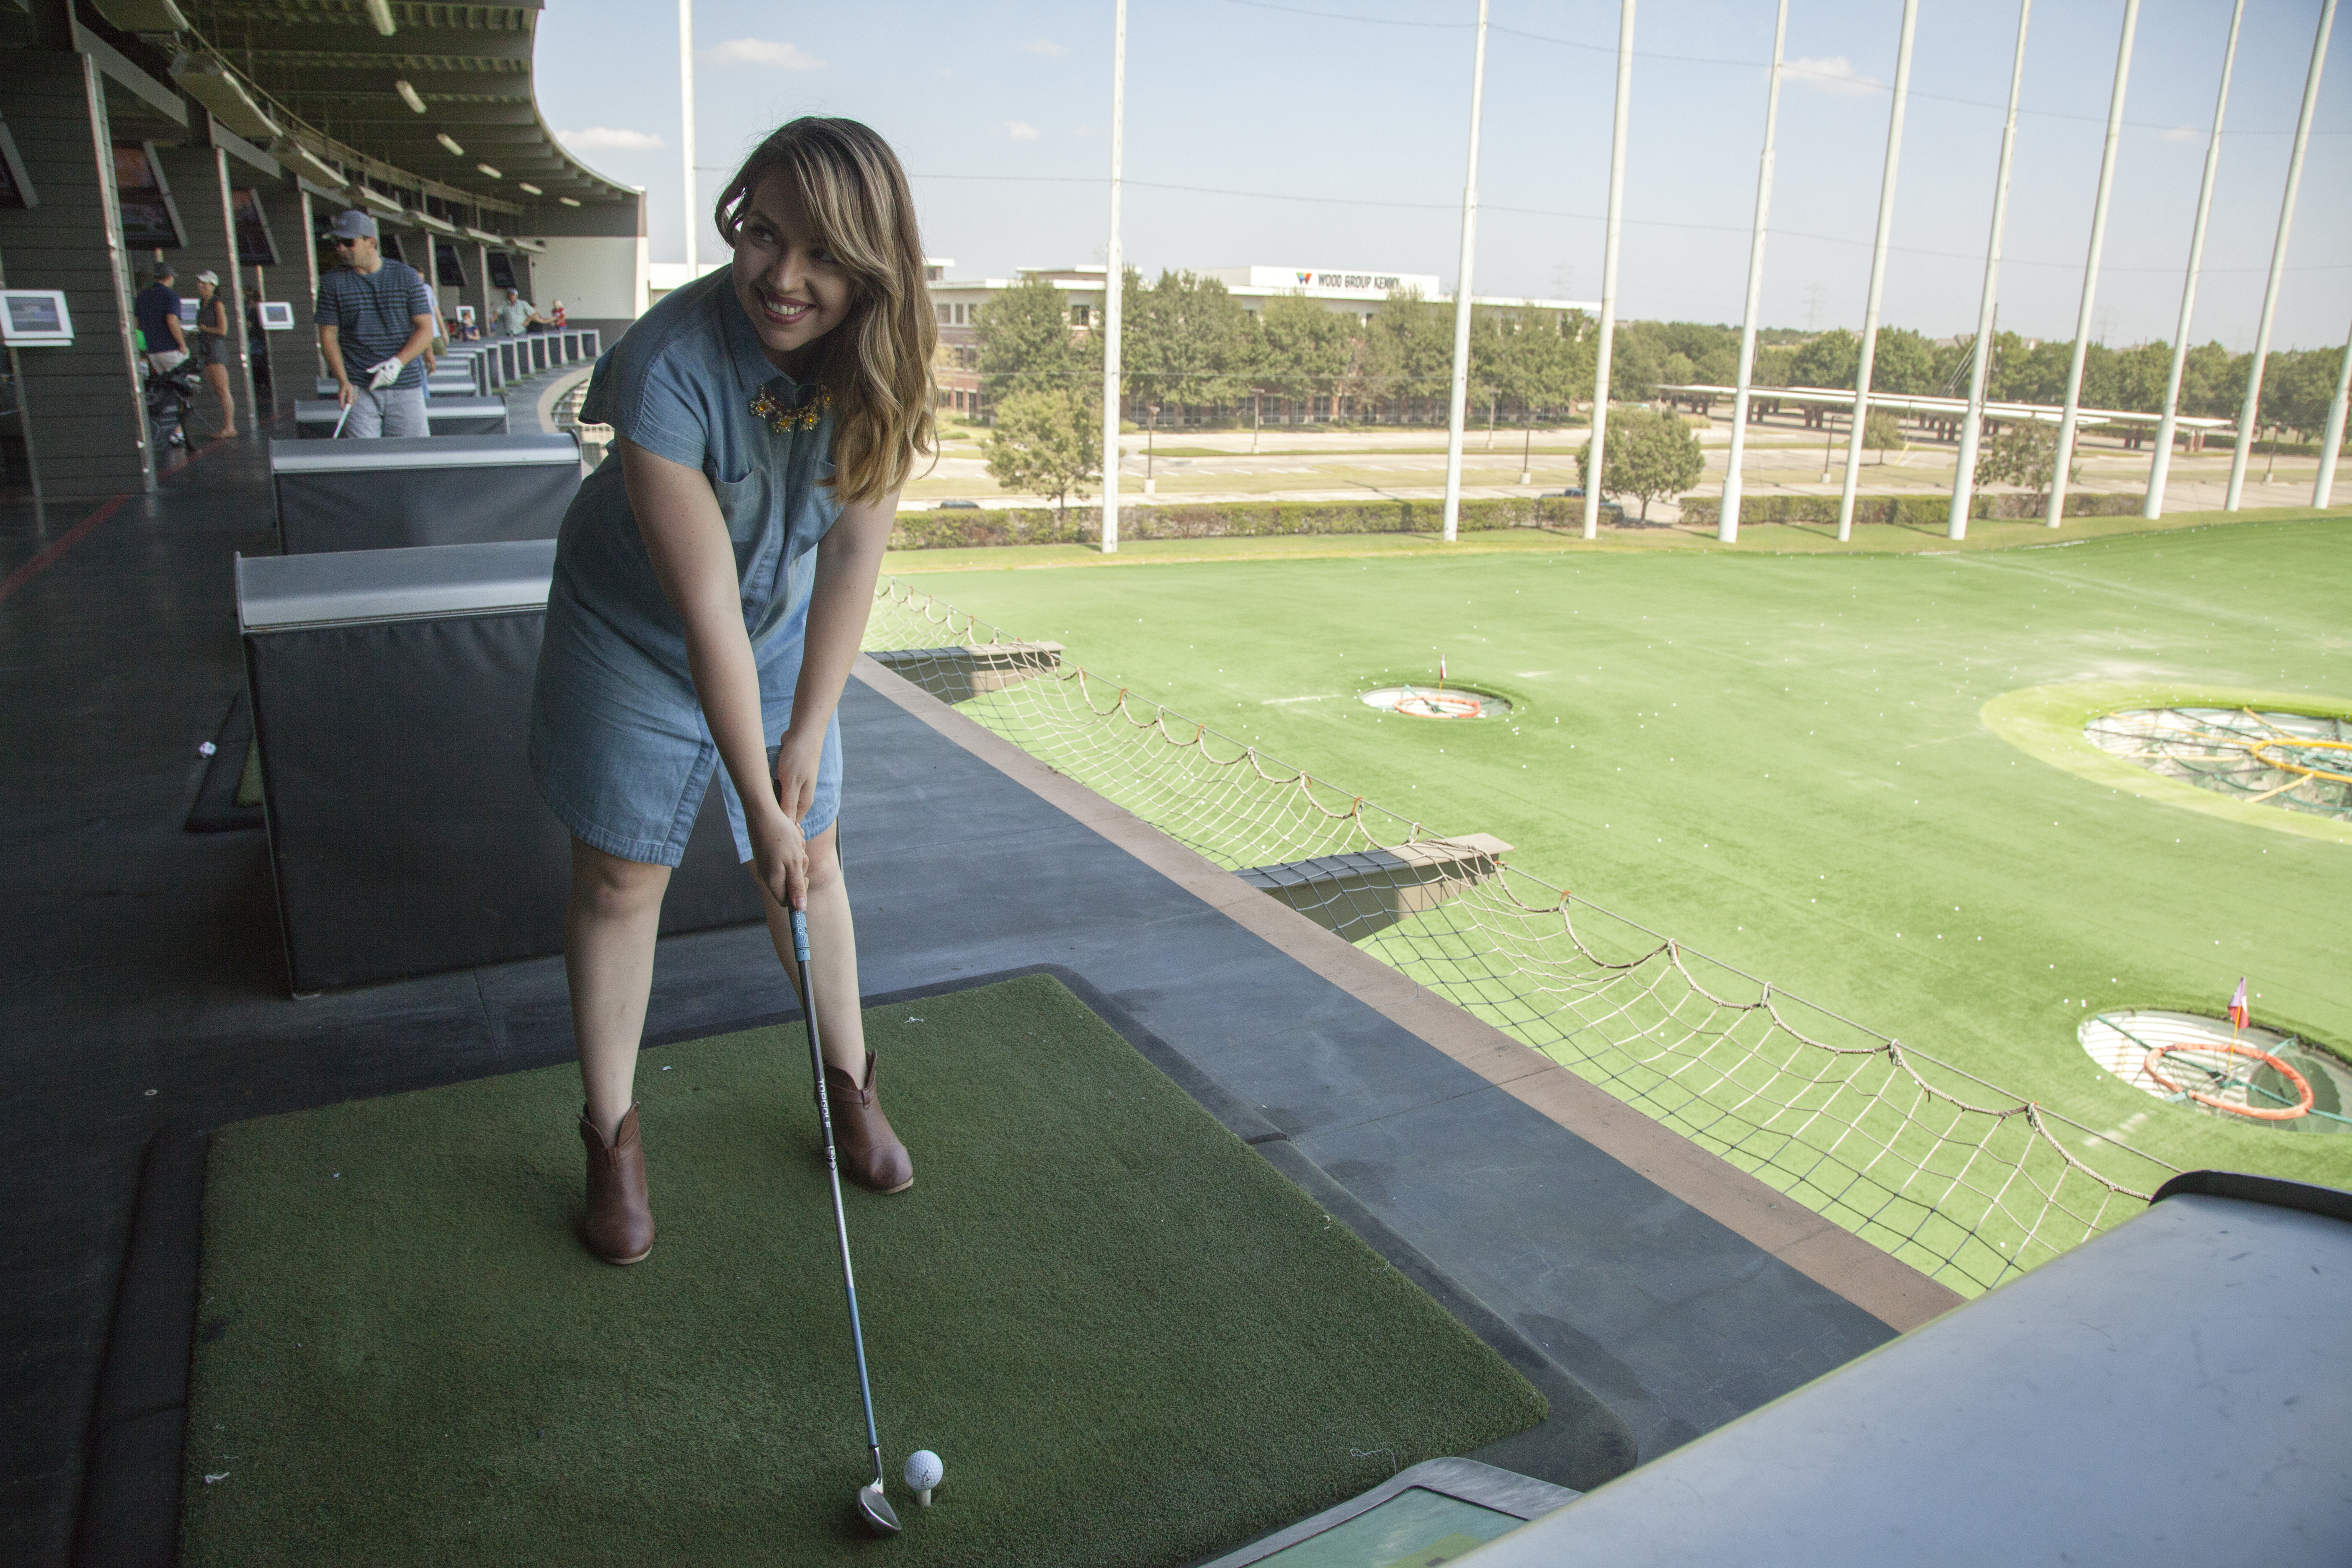 First Timer's Guide to Topgolf